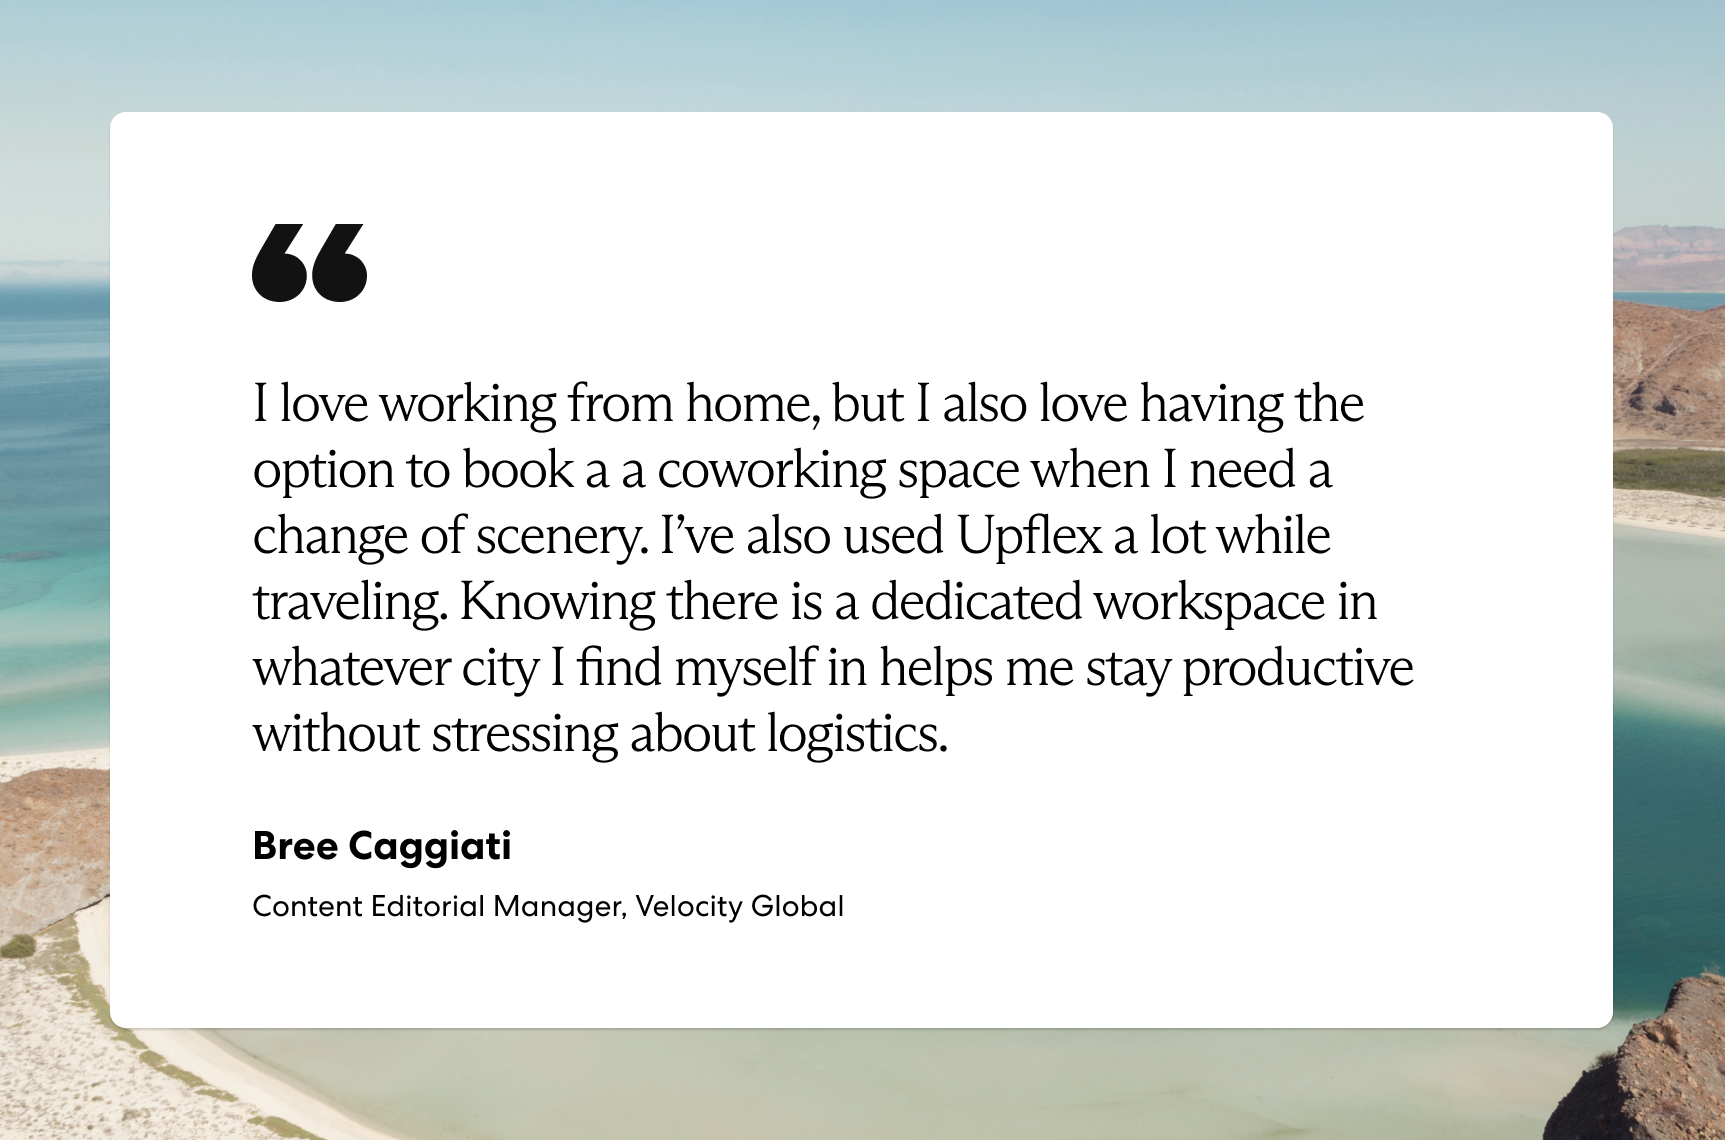 Velocity Global Content Editorial Manager Bree Caggiati quote about using Upflex